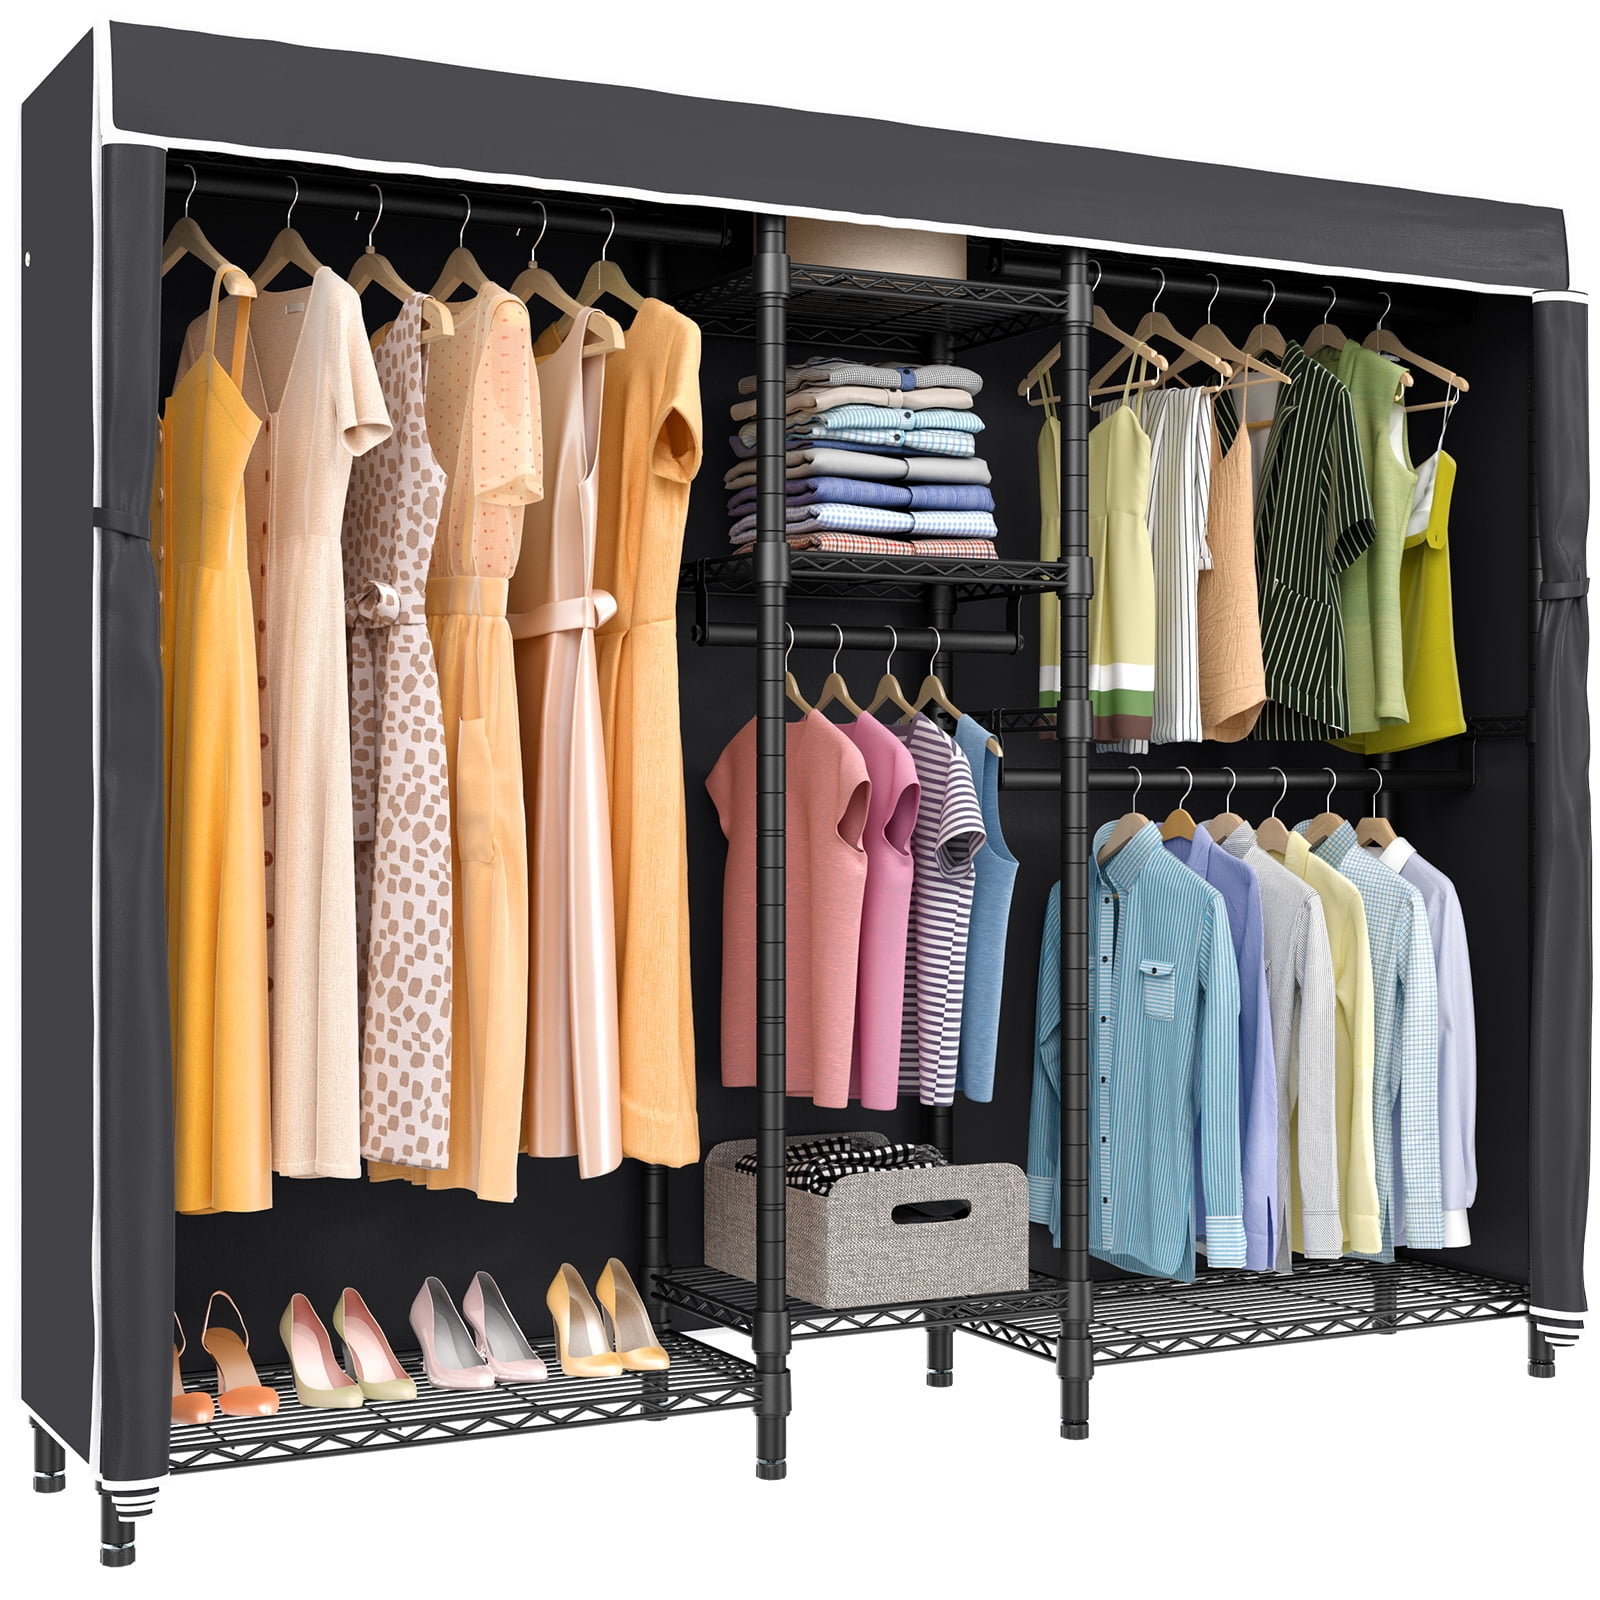 VIPEK V6C 5 Tiers Wire Garment Rack with Black Oxford Fabric Cover, 75. ...